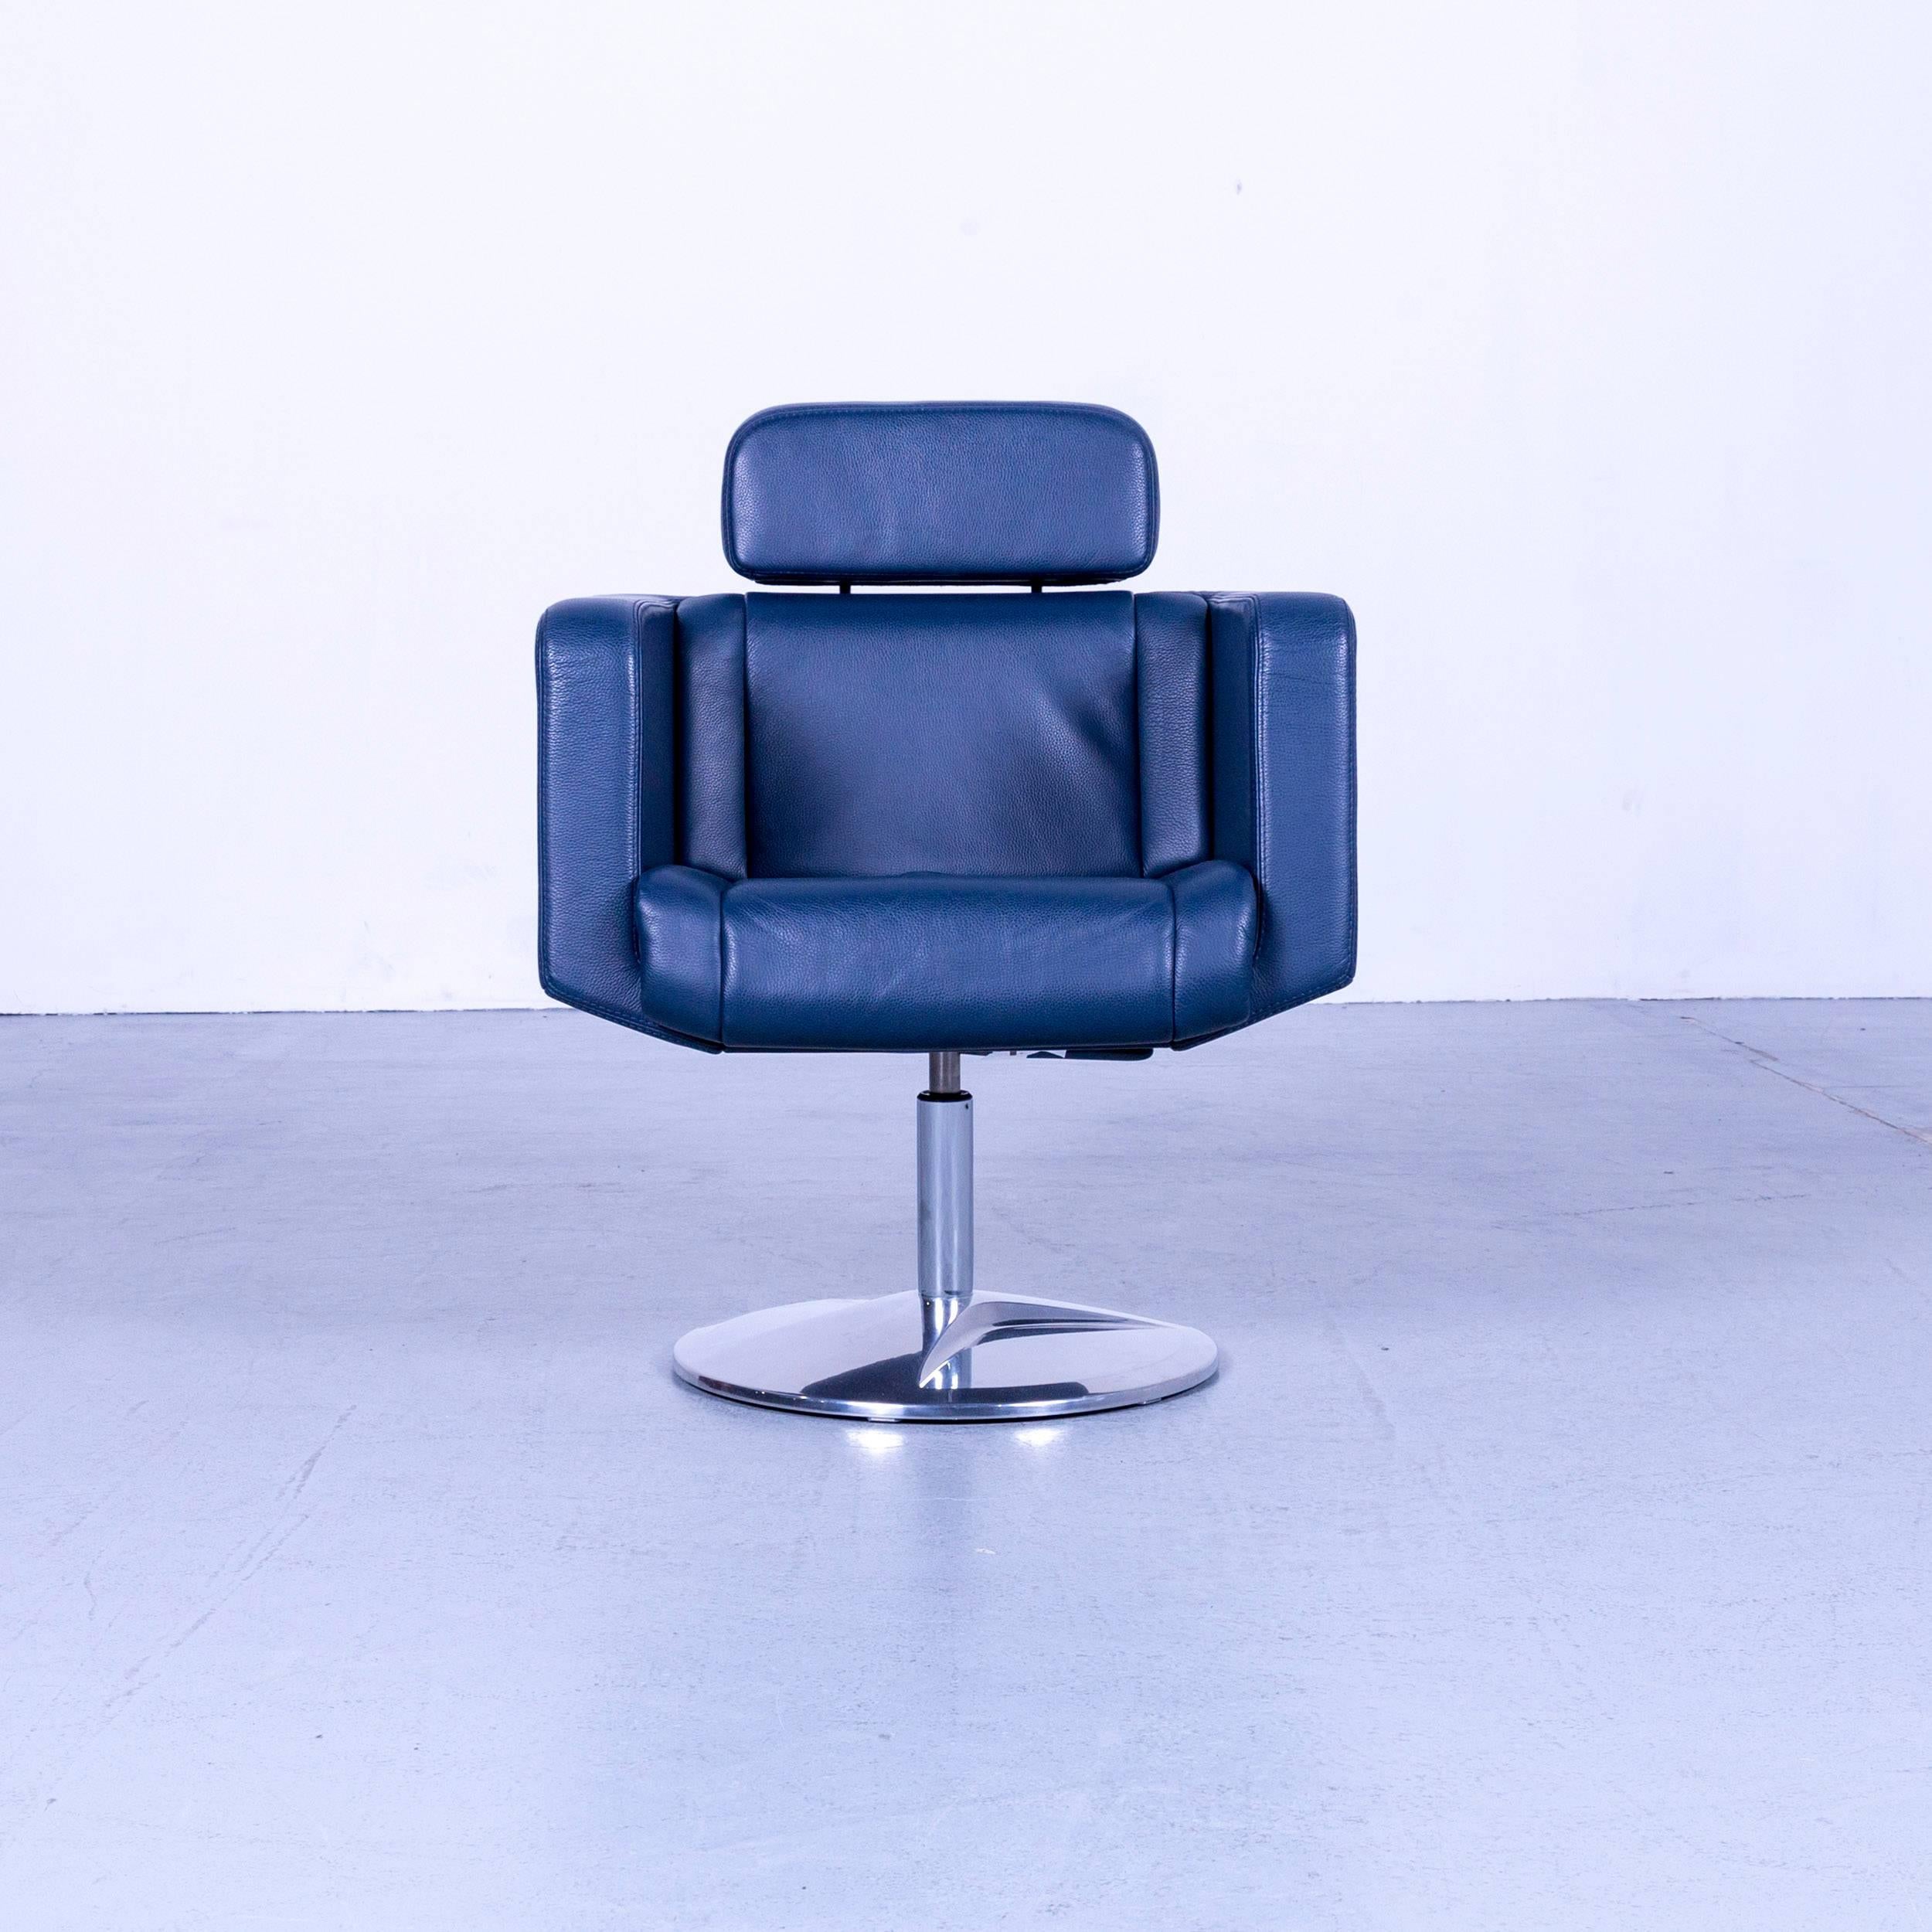 We offer delivery options to most destinations on earth. Find our shipping quotes at the bottom of this page in the shipping section.

An Stoll Giroflex 21-6091 designer armchair blue leather one-seat modern
